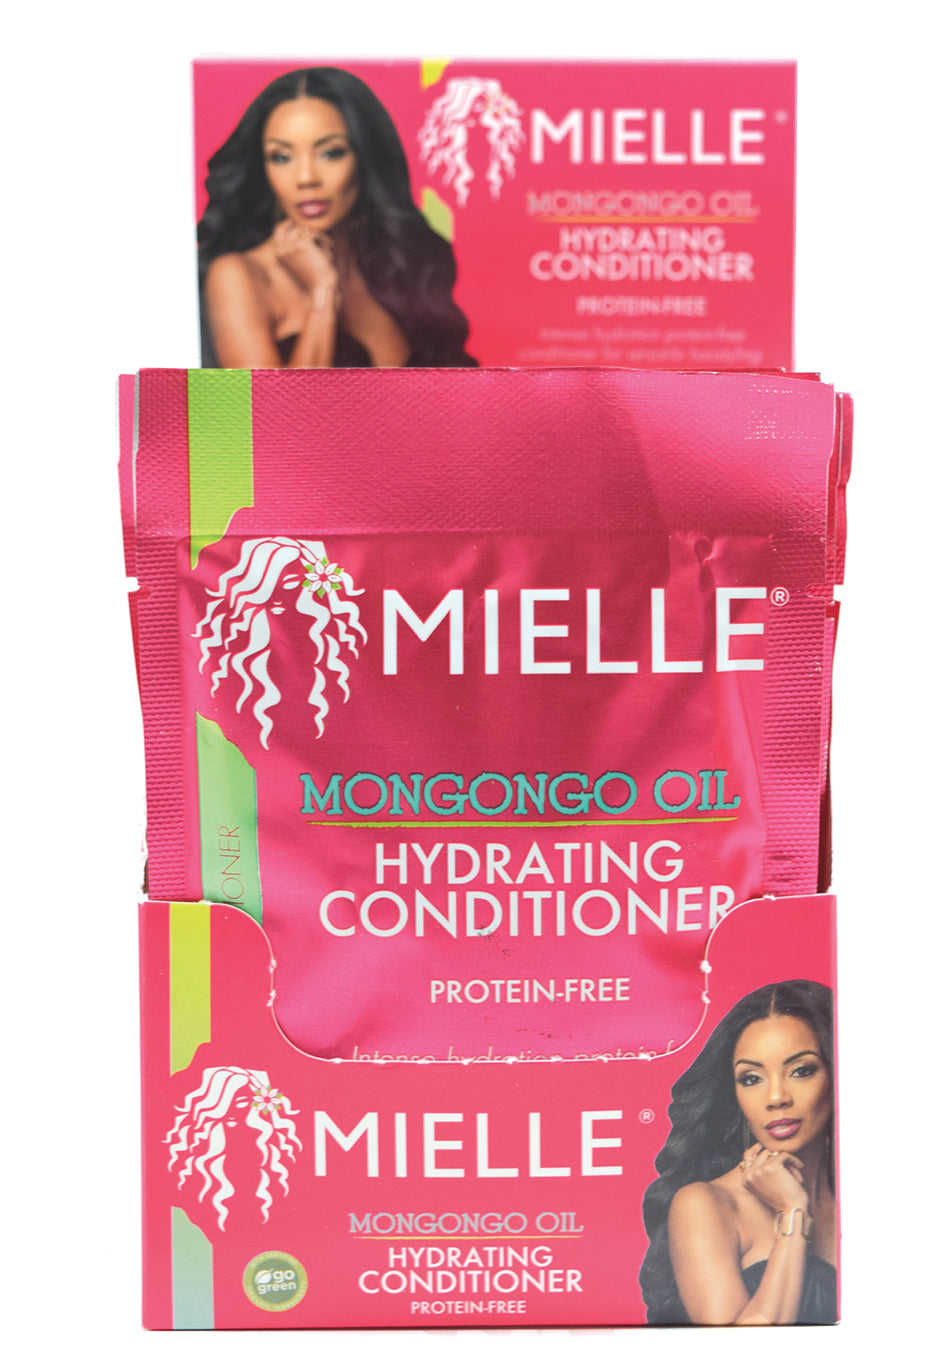 MIELLE MONGONGO OIL HYDRATING CONDITIONER PKTS (1.75OZ)